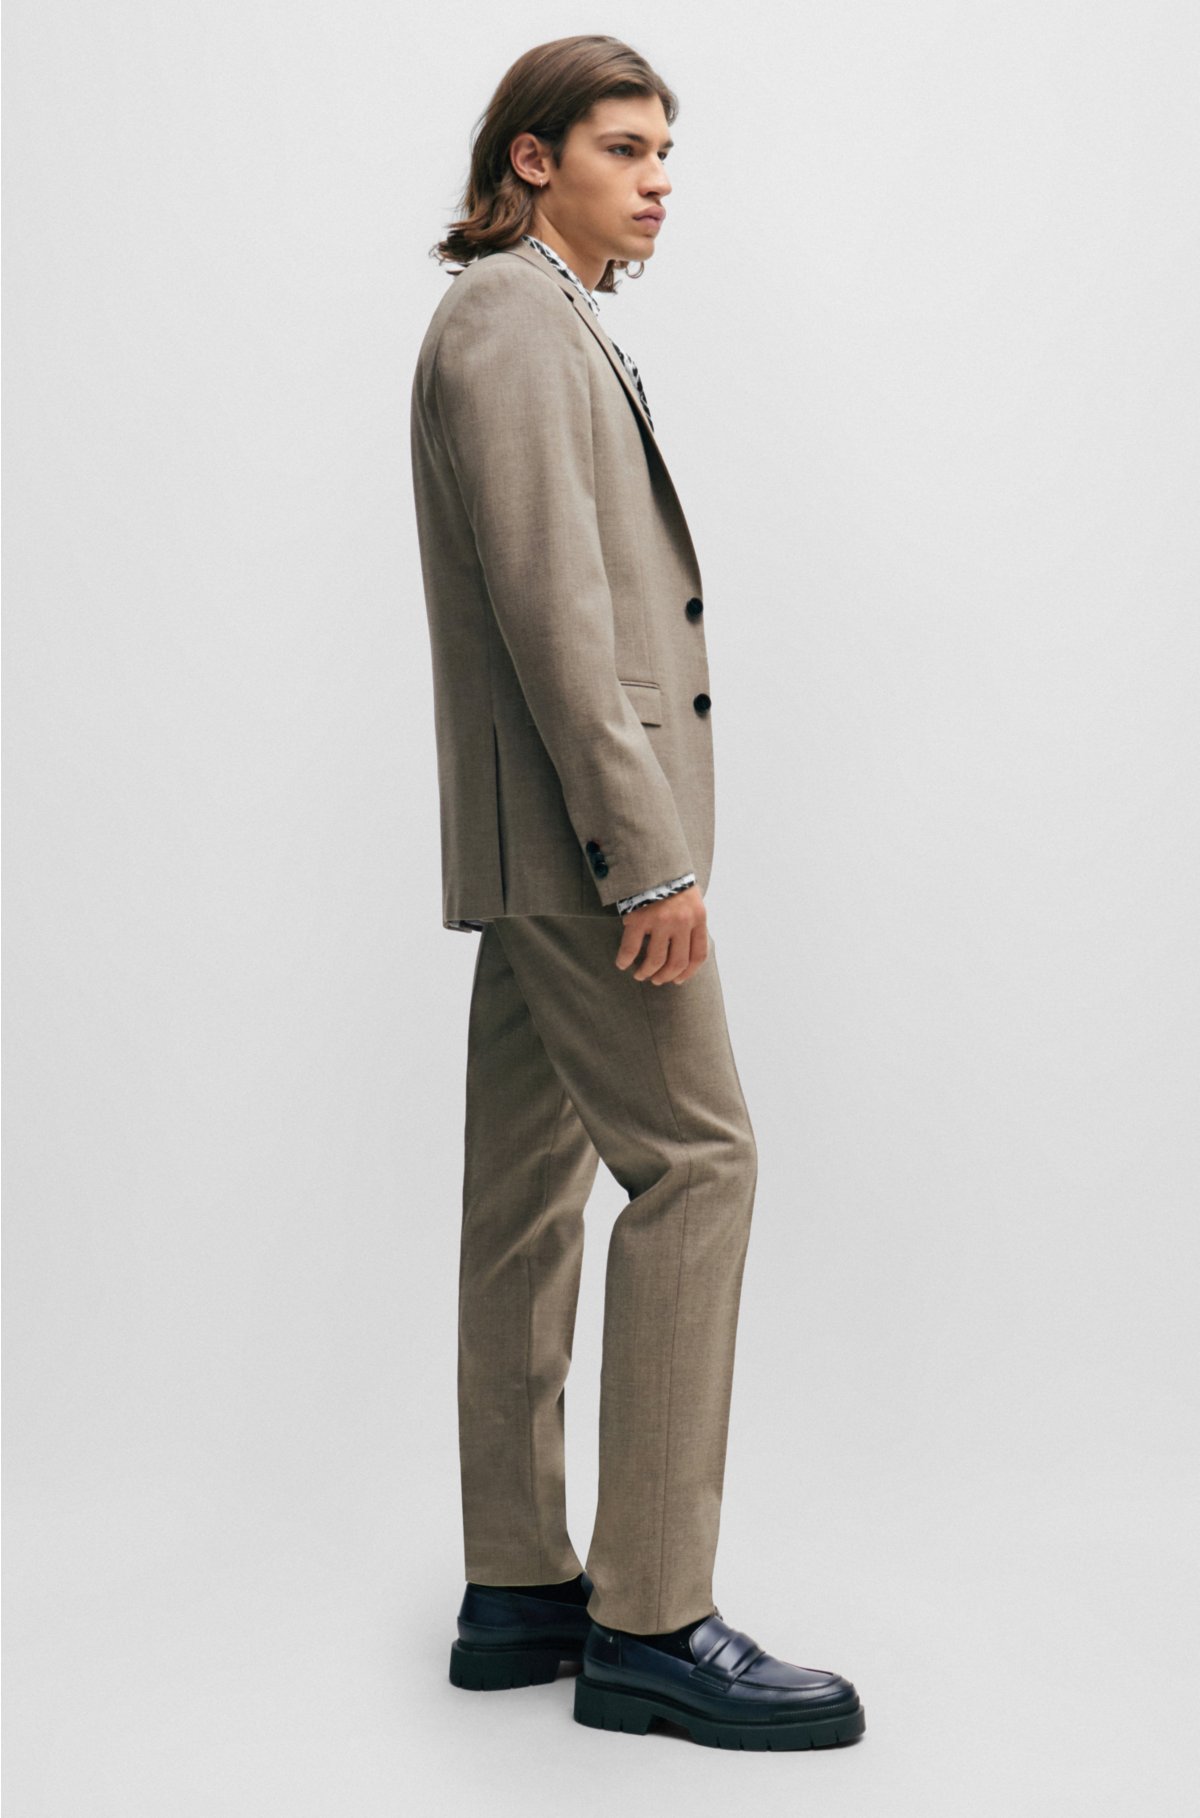 Extra-slim-fit suit in patterned wool-blend canvas, Light Beige